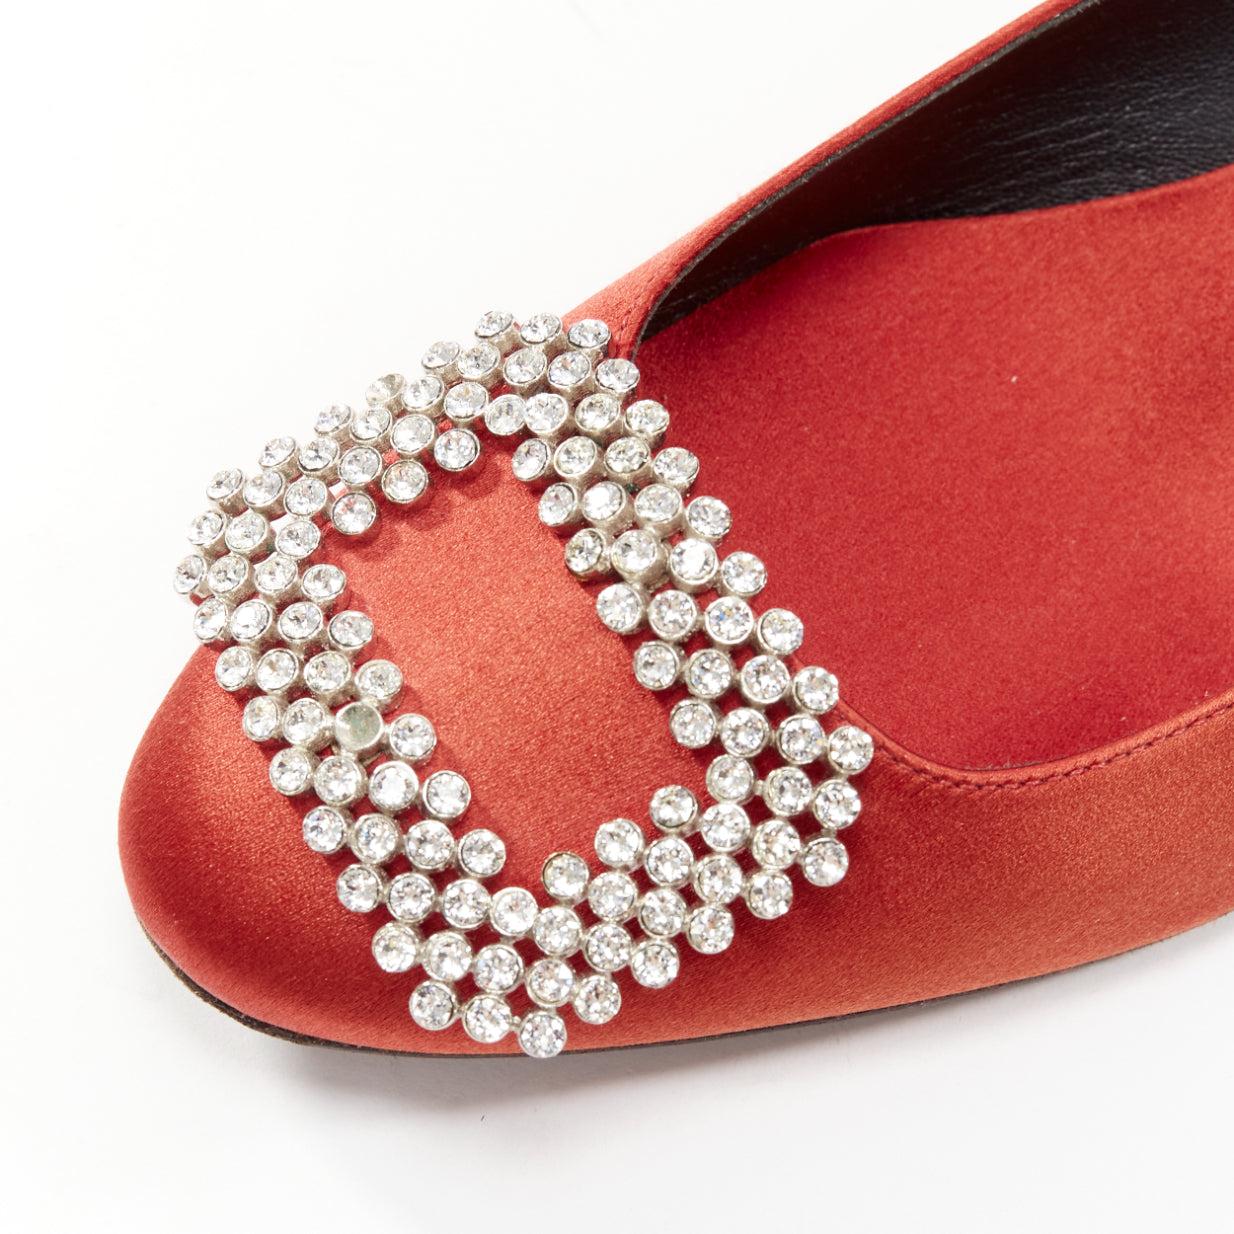 ROGER VIVIER red satin silver strass crystal buckle classic dress flats EU36.5 For Sale 2